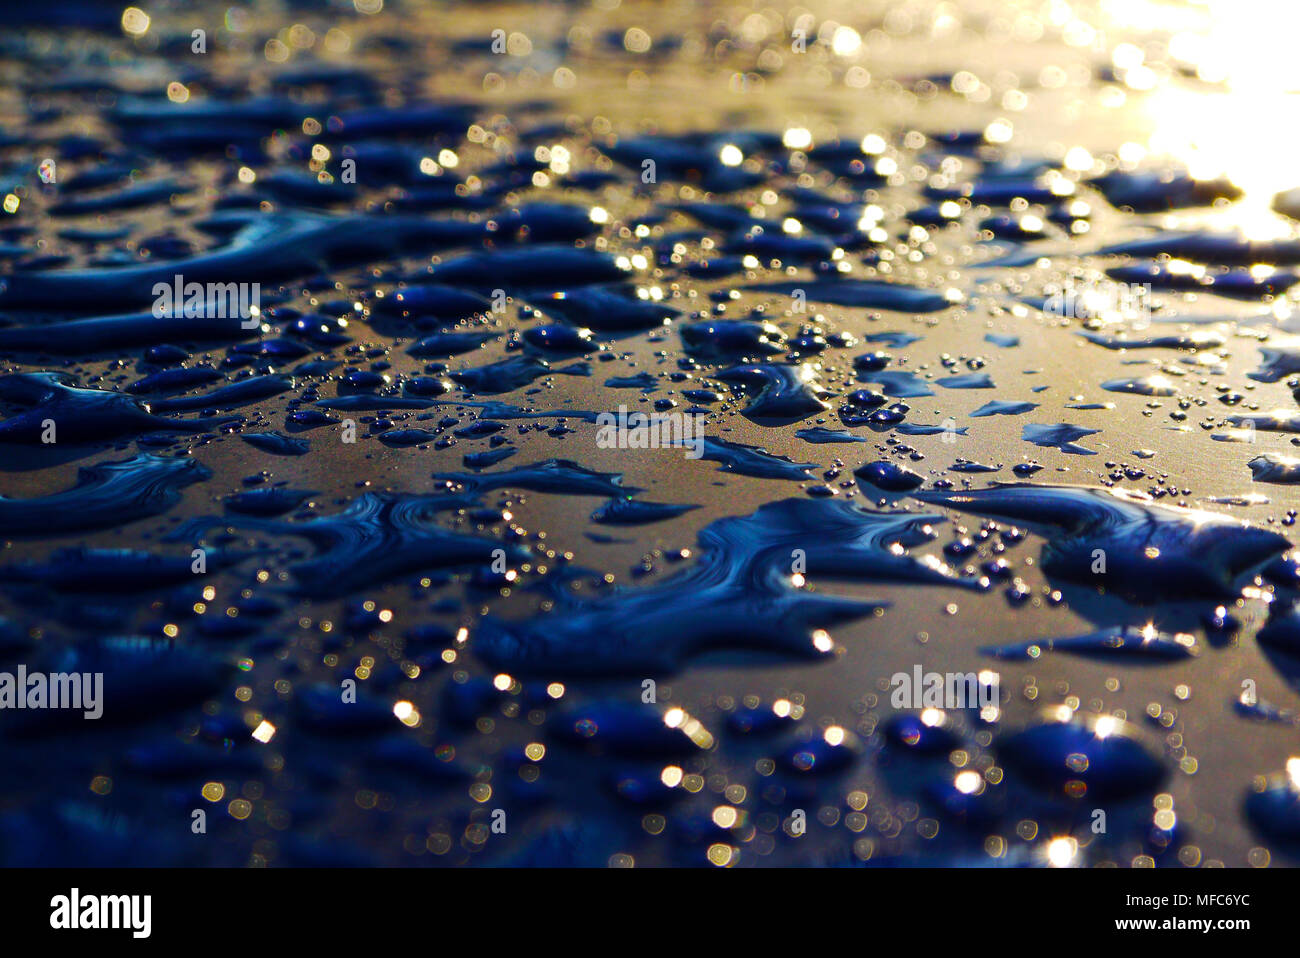 drops of water-repellent surface in black & blue and sun Stock Photo